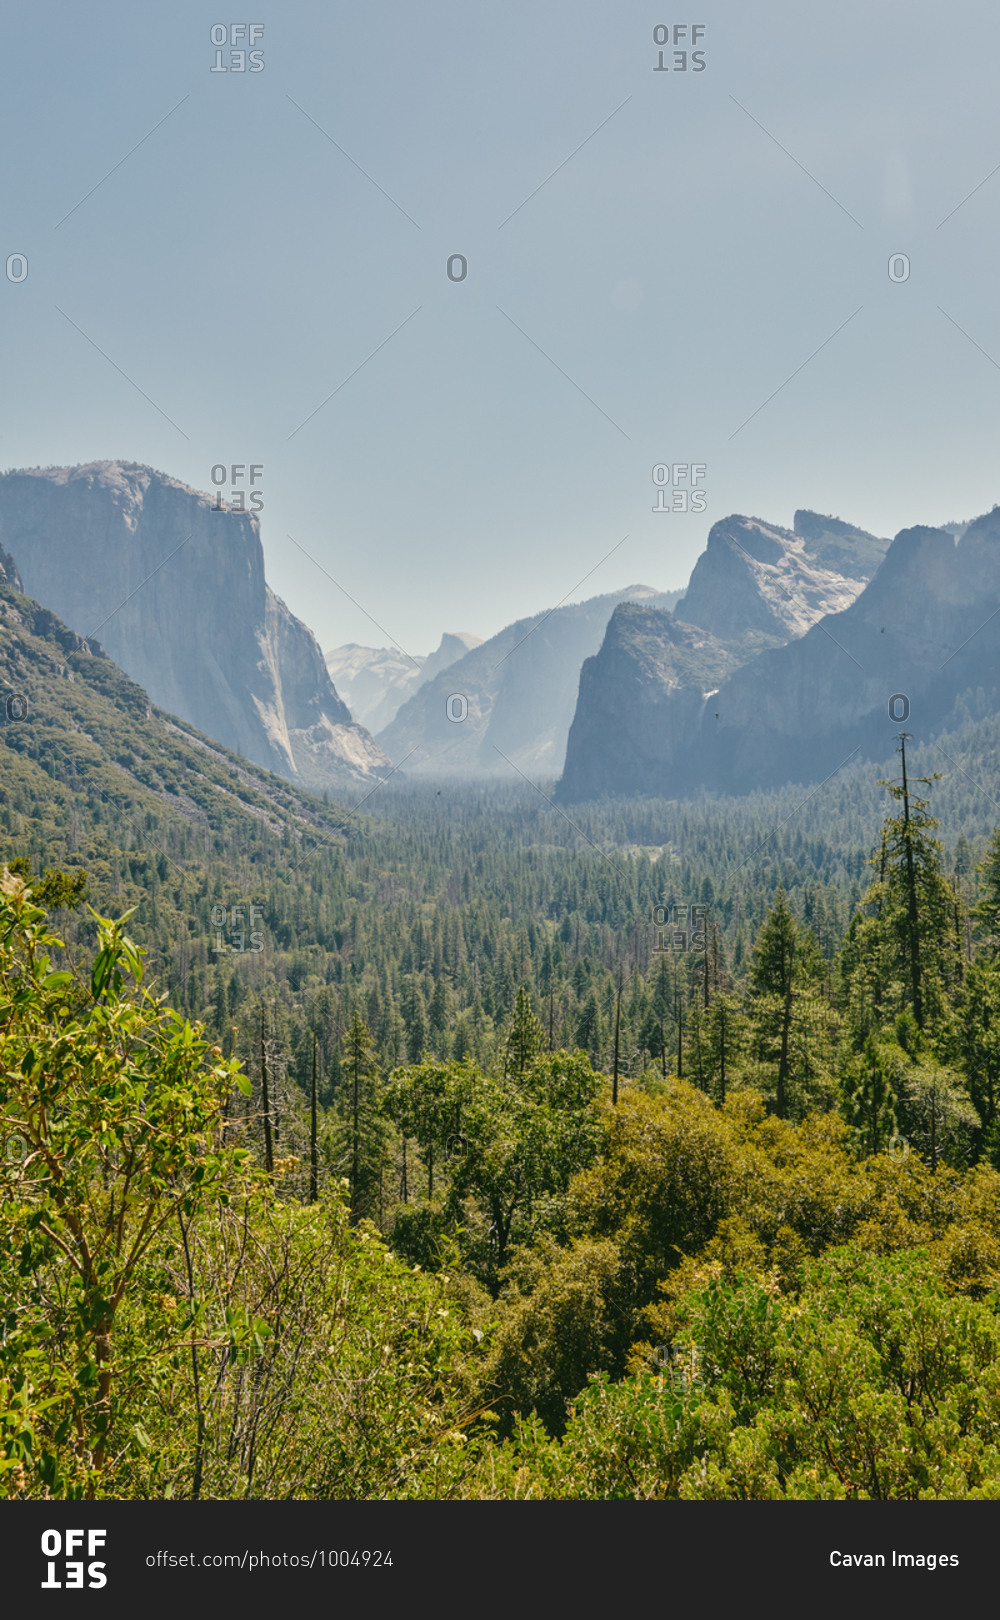 Views of Yosemite National Park Valley in northern California.